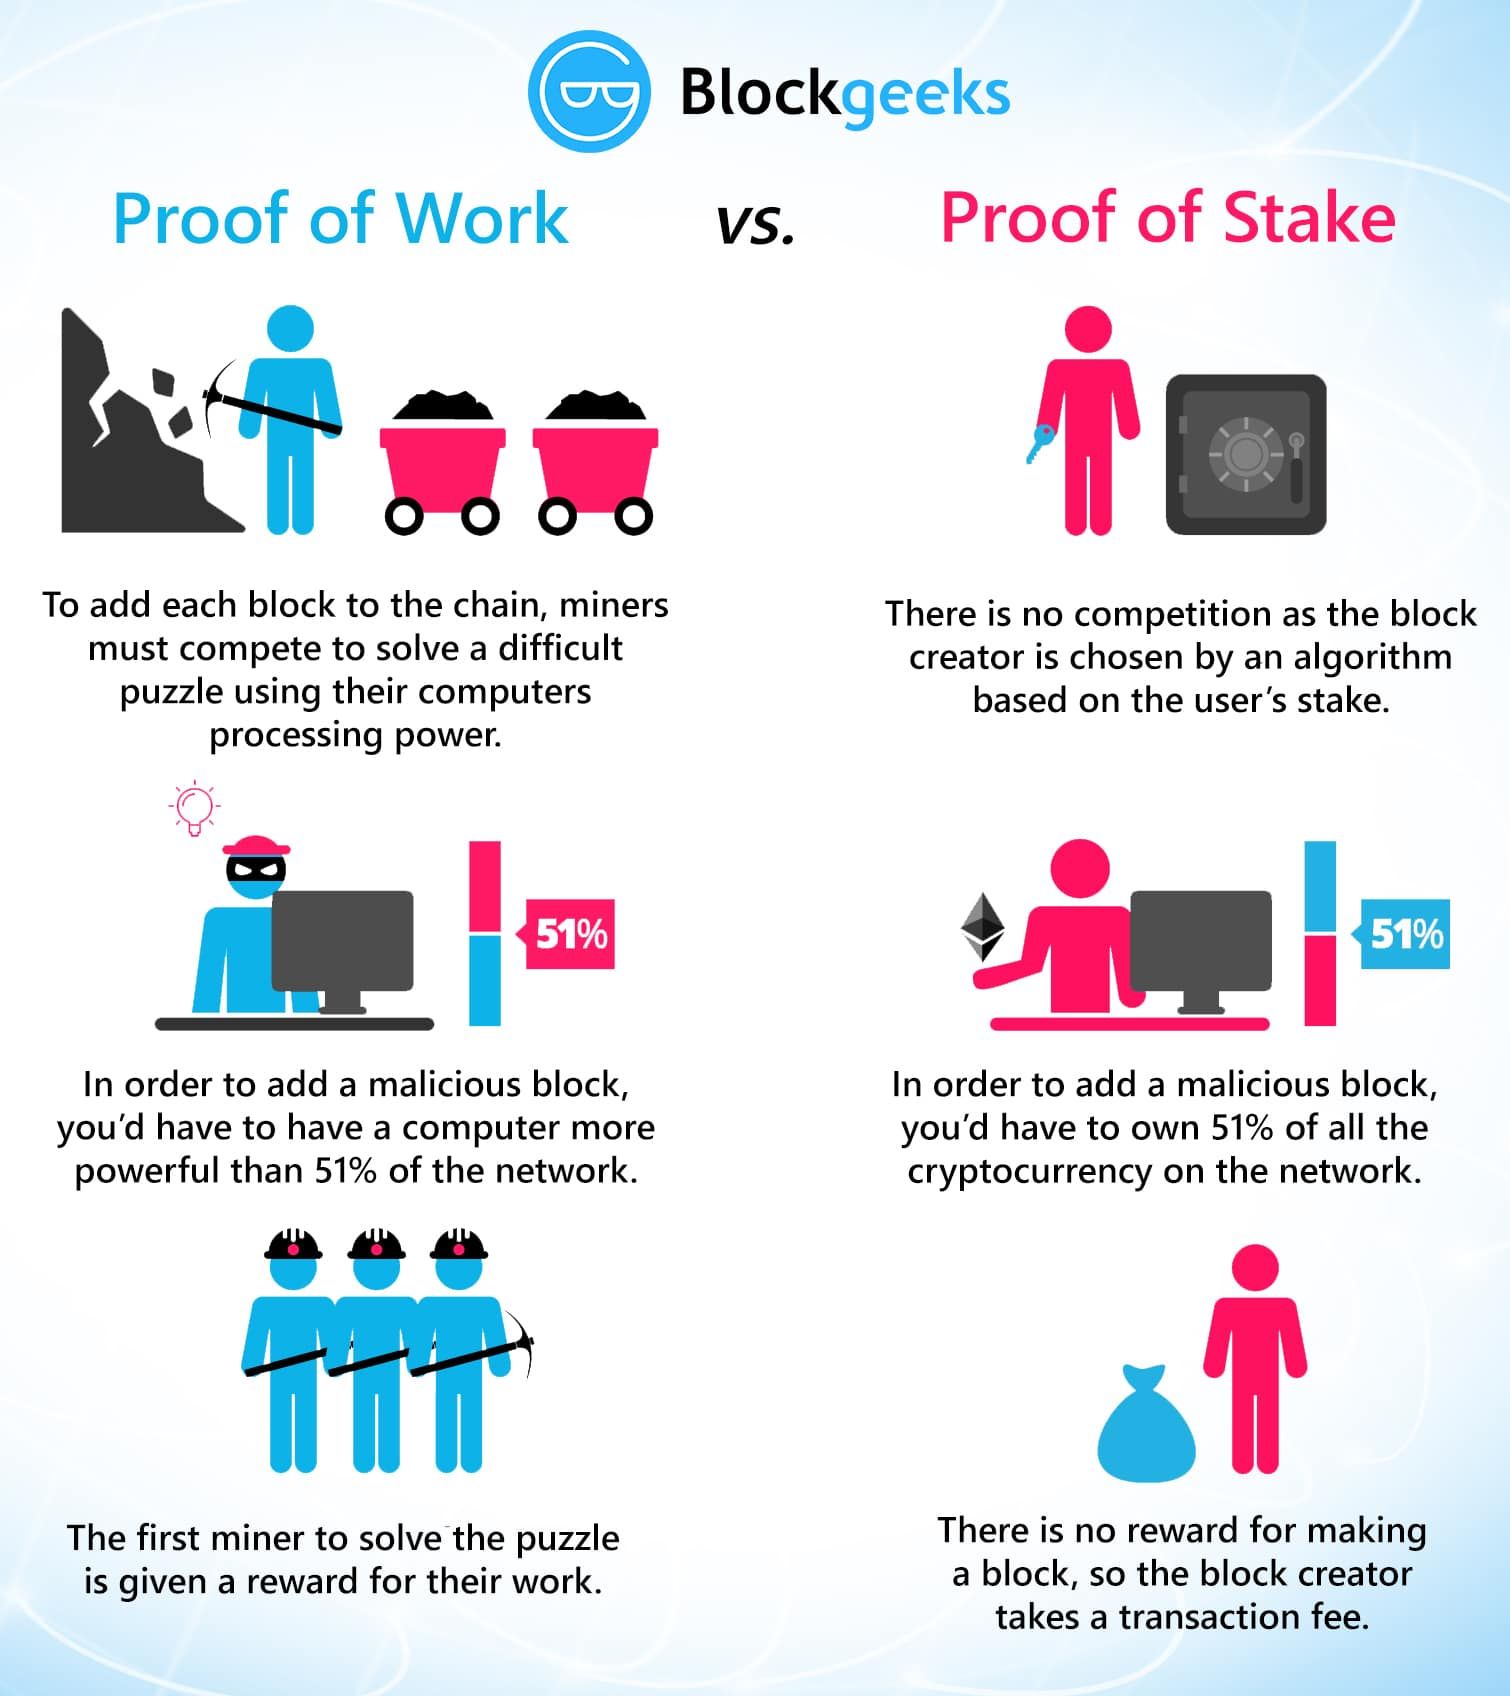 stake crypto meaning